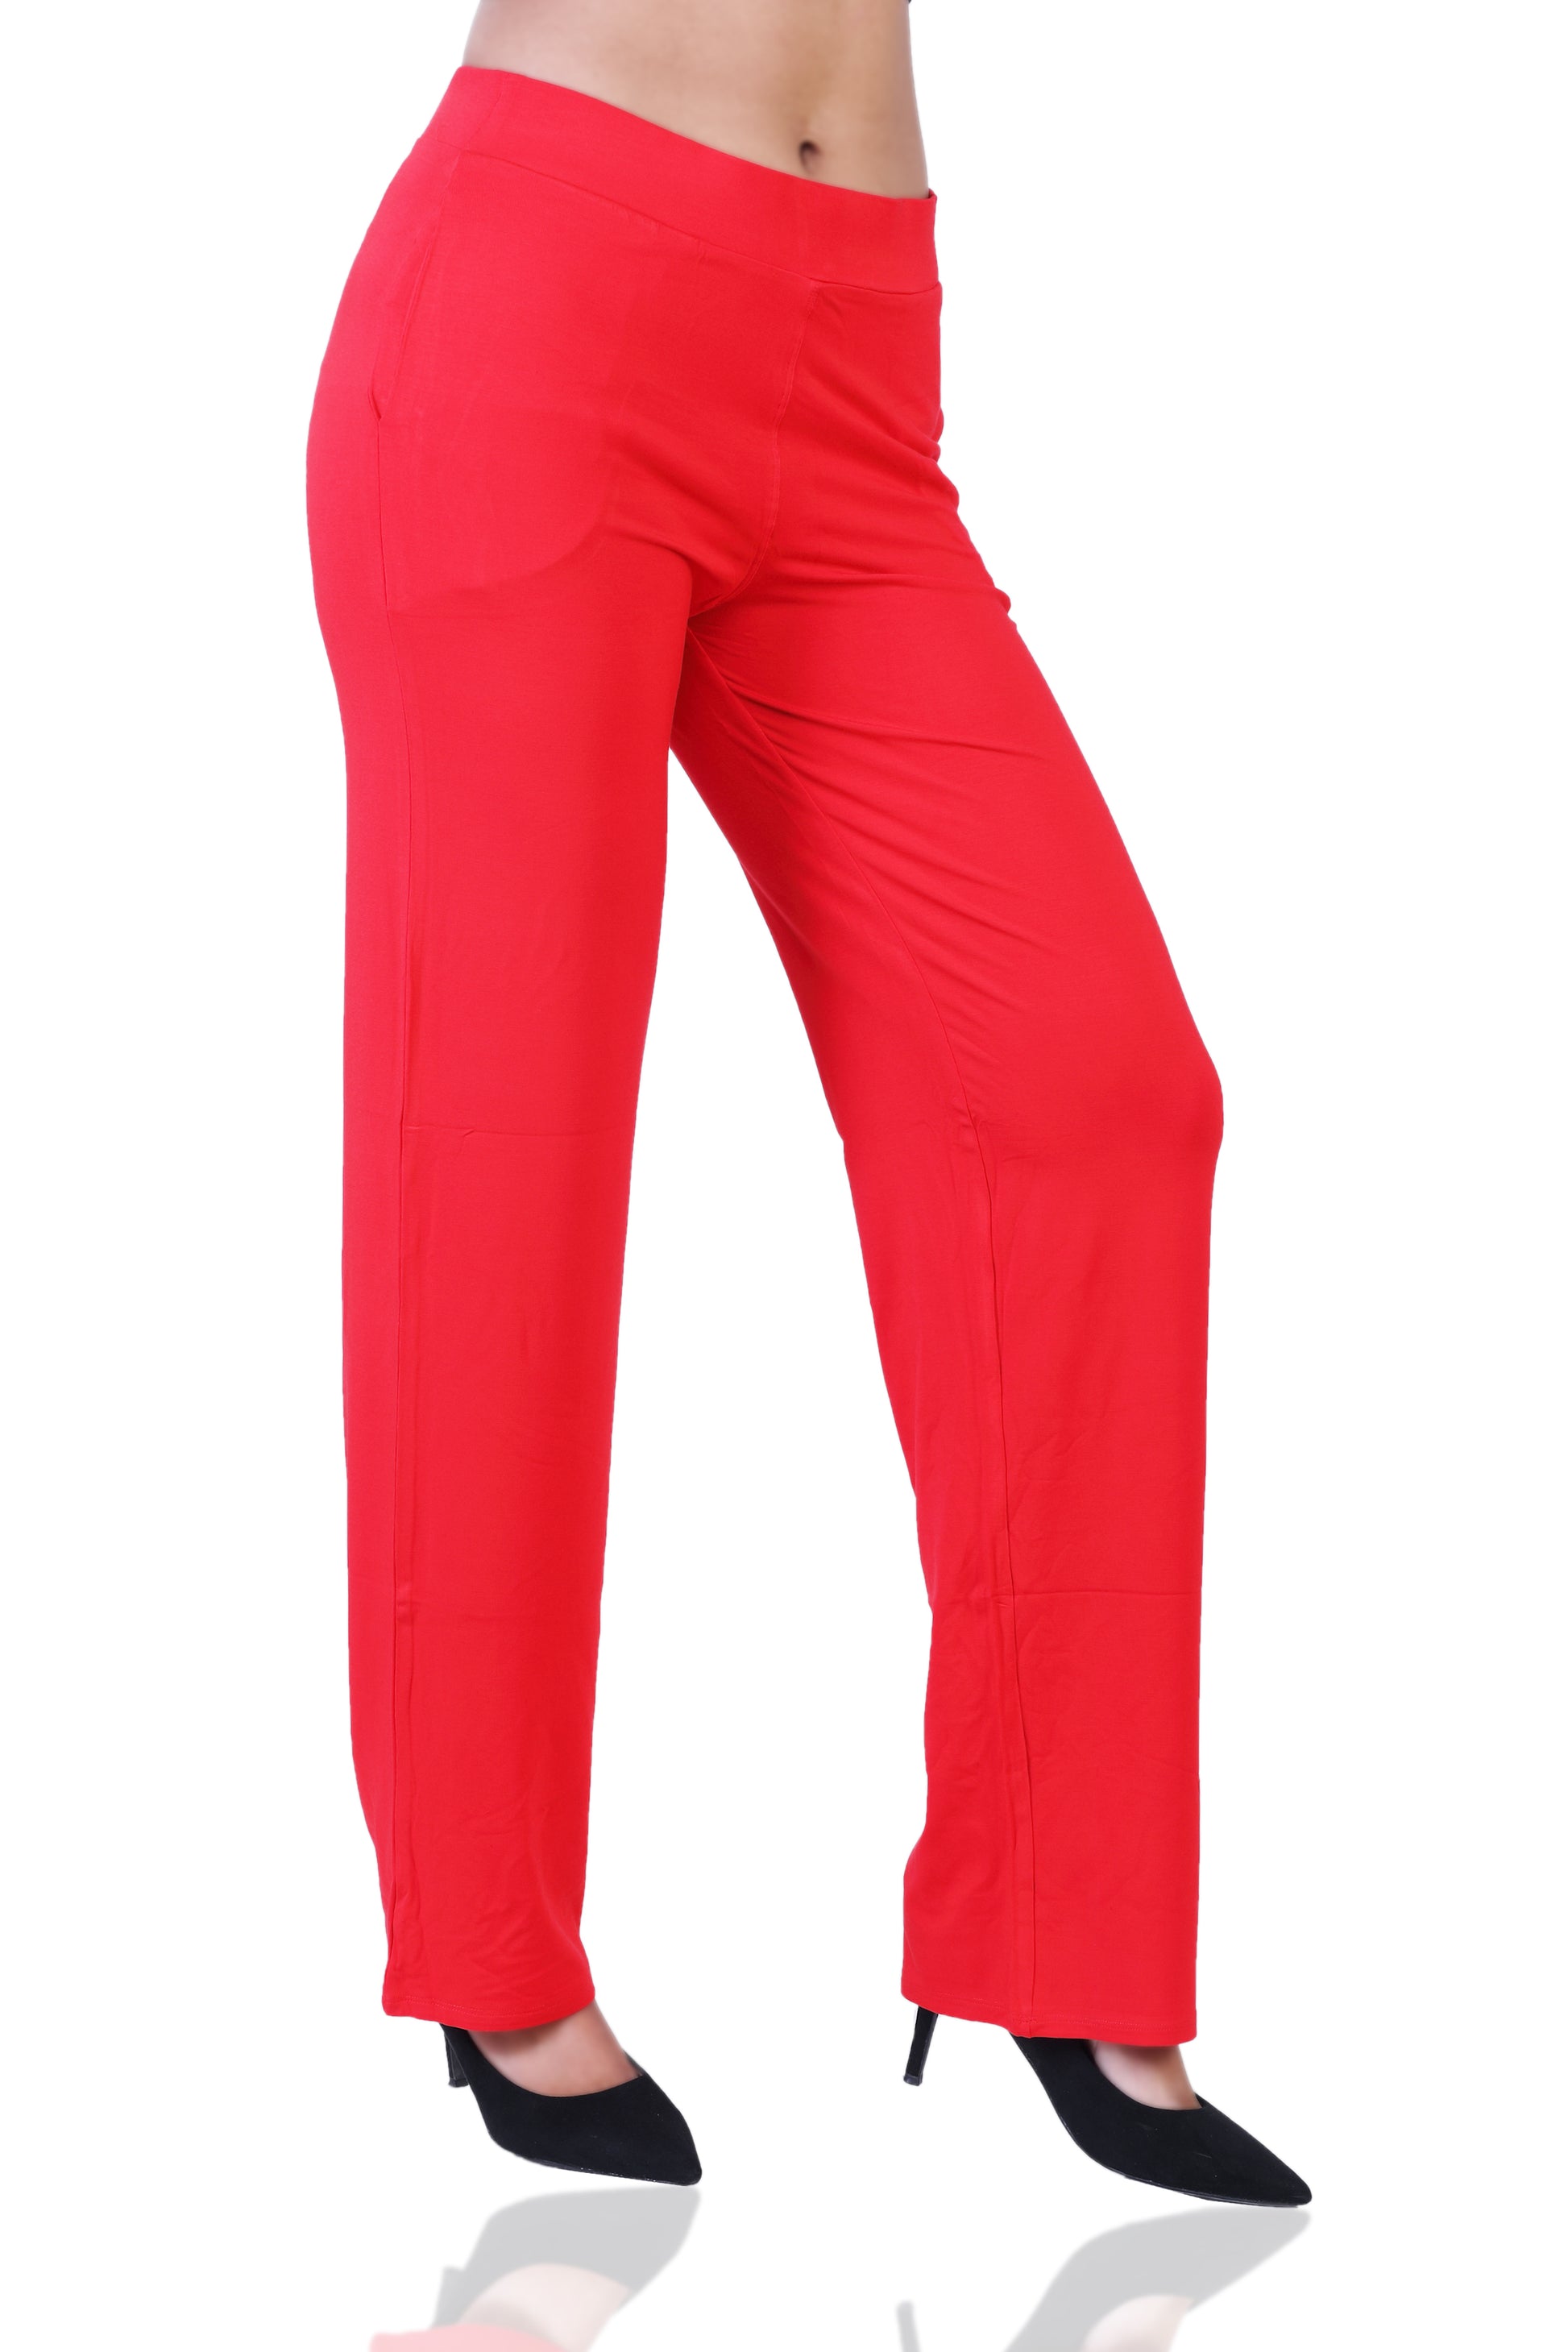 Plain Women Sports Trousers at Rs 180/piece in Delhi